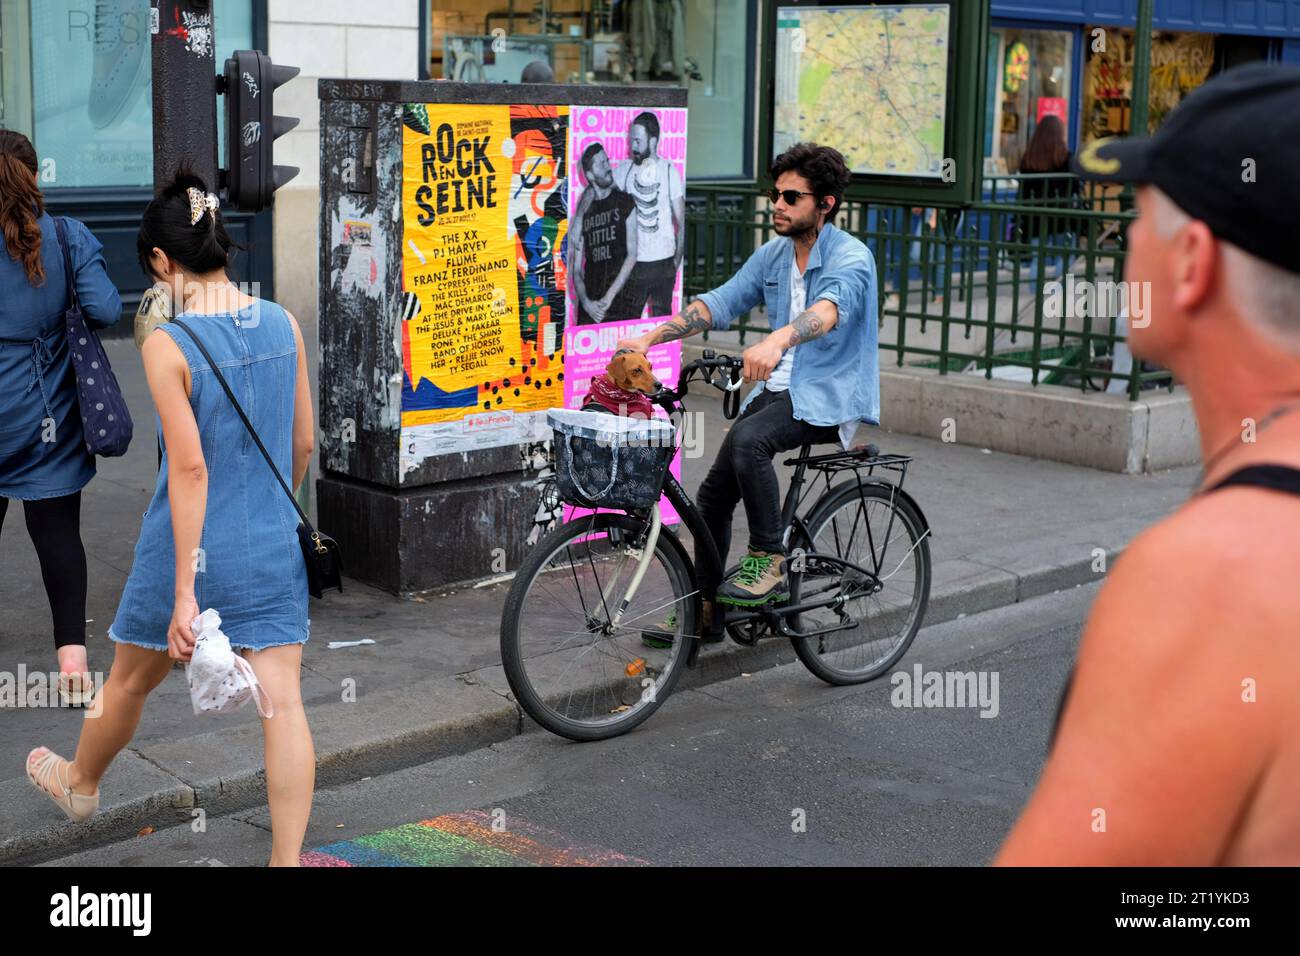 A Paris street scene a man on a bicycle stopped an a crossing near Hôtel de Ville with a dachshund in the handlebar basket, people, posters, street s. Stock Photo